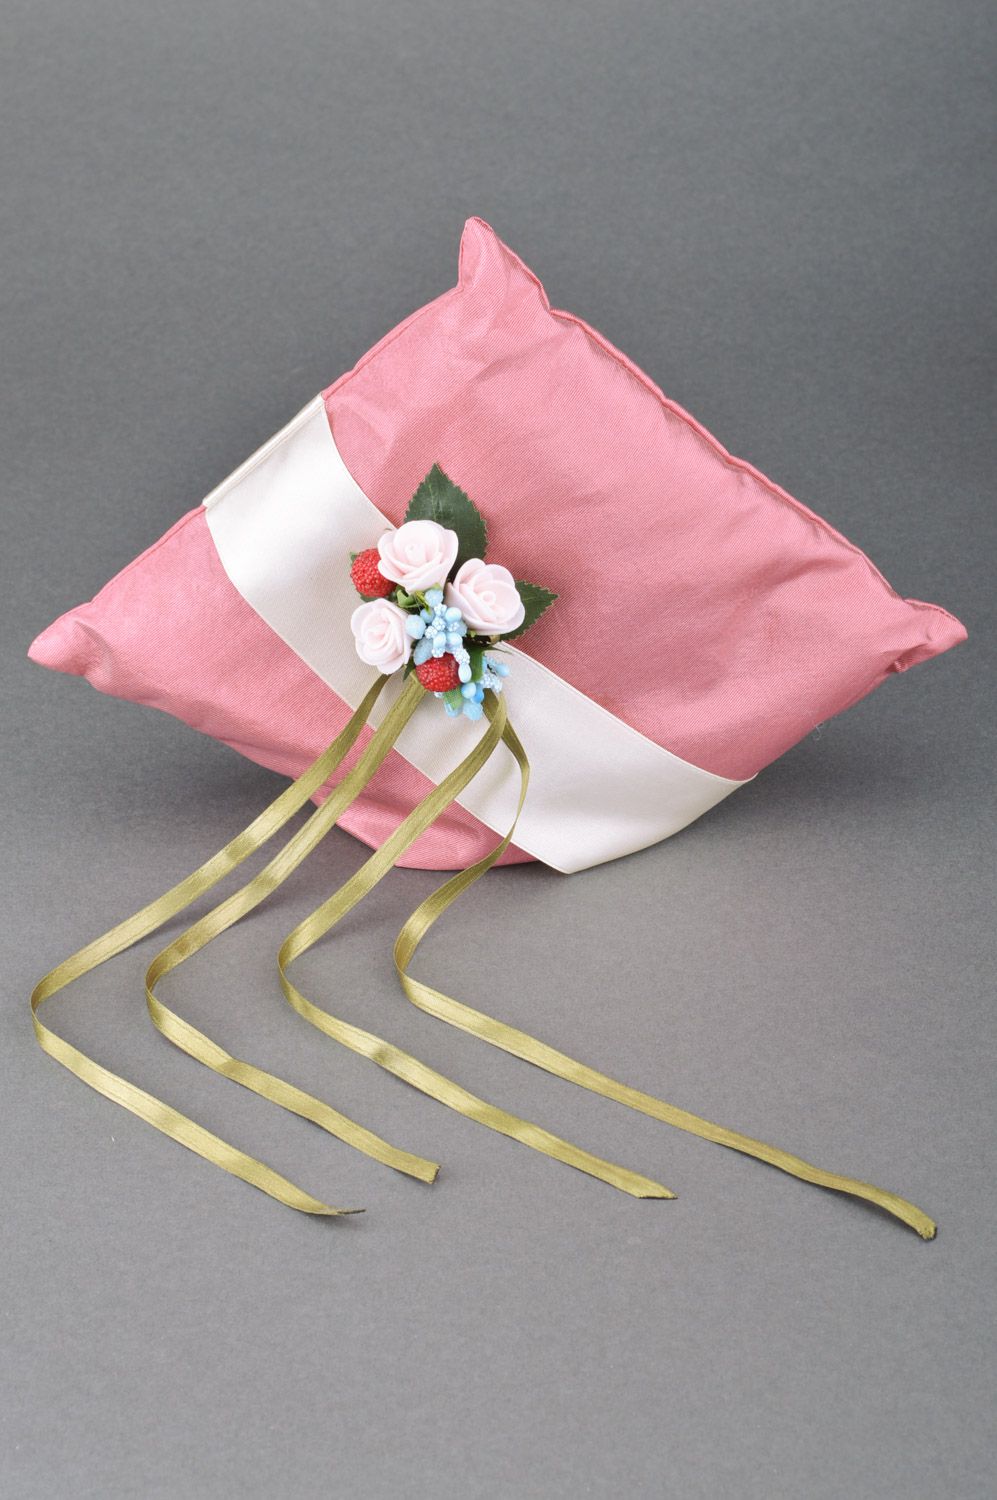 Handmade wedding rings pillow sewn of pink satin fabric with flowers and ribbons photo 2